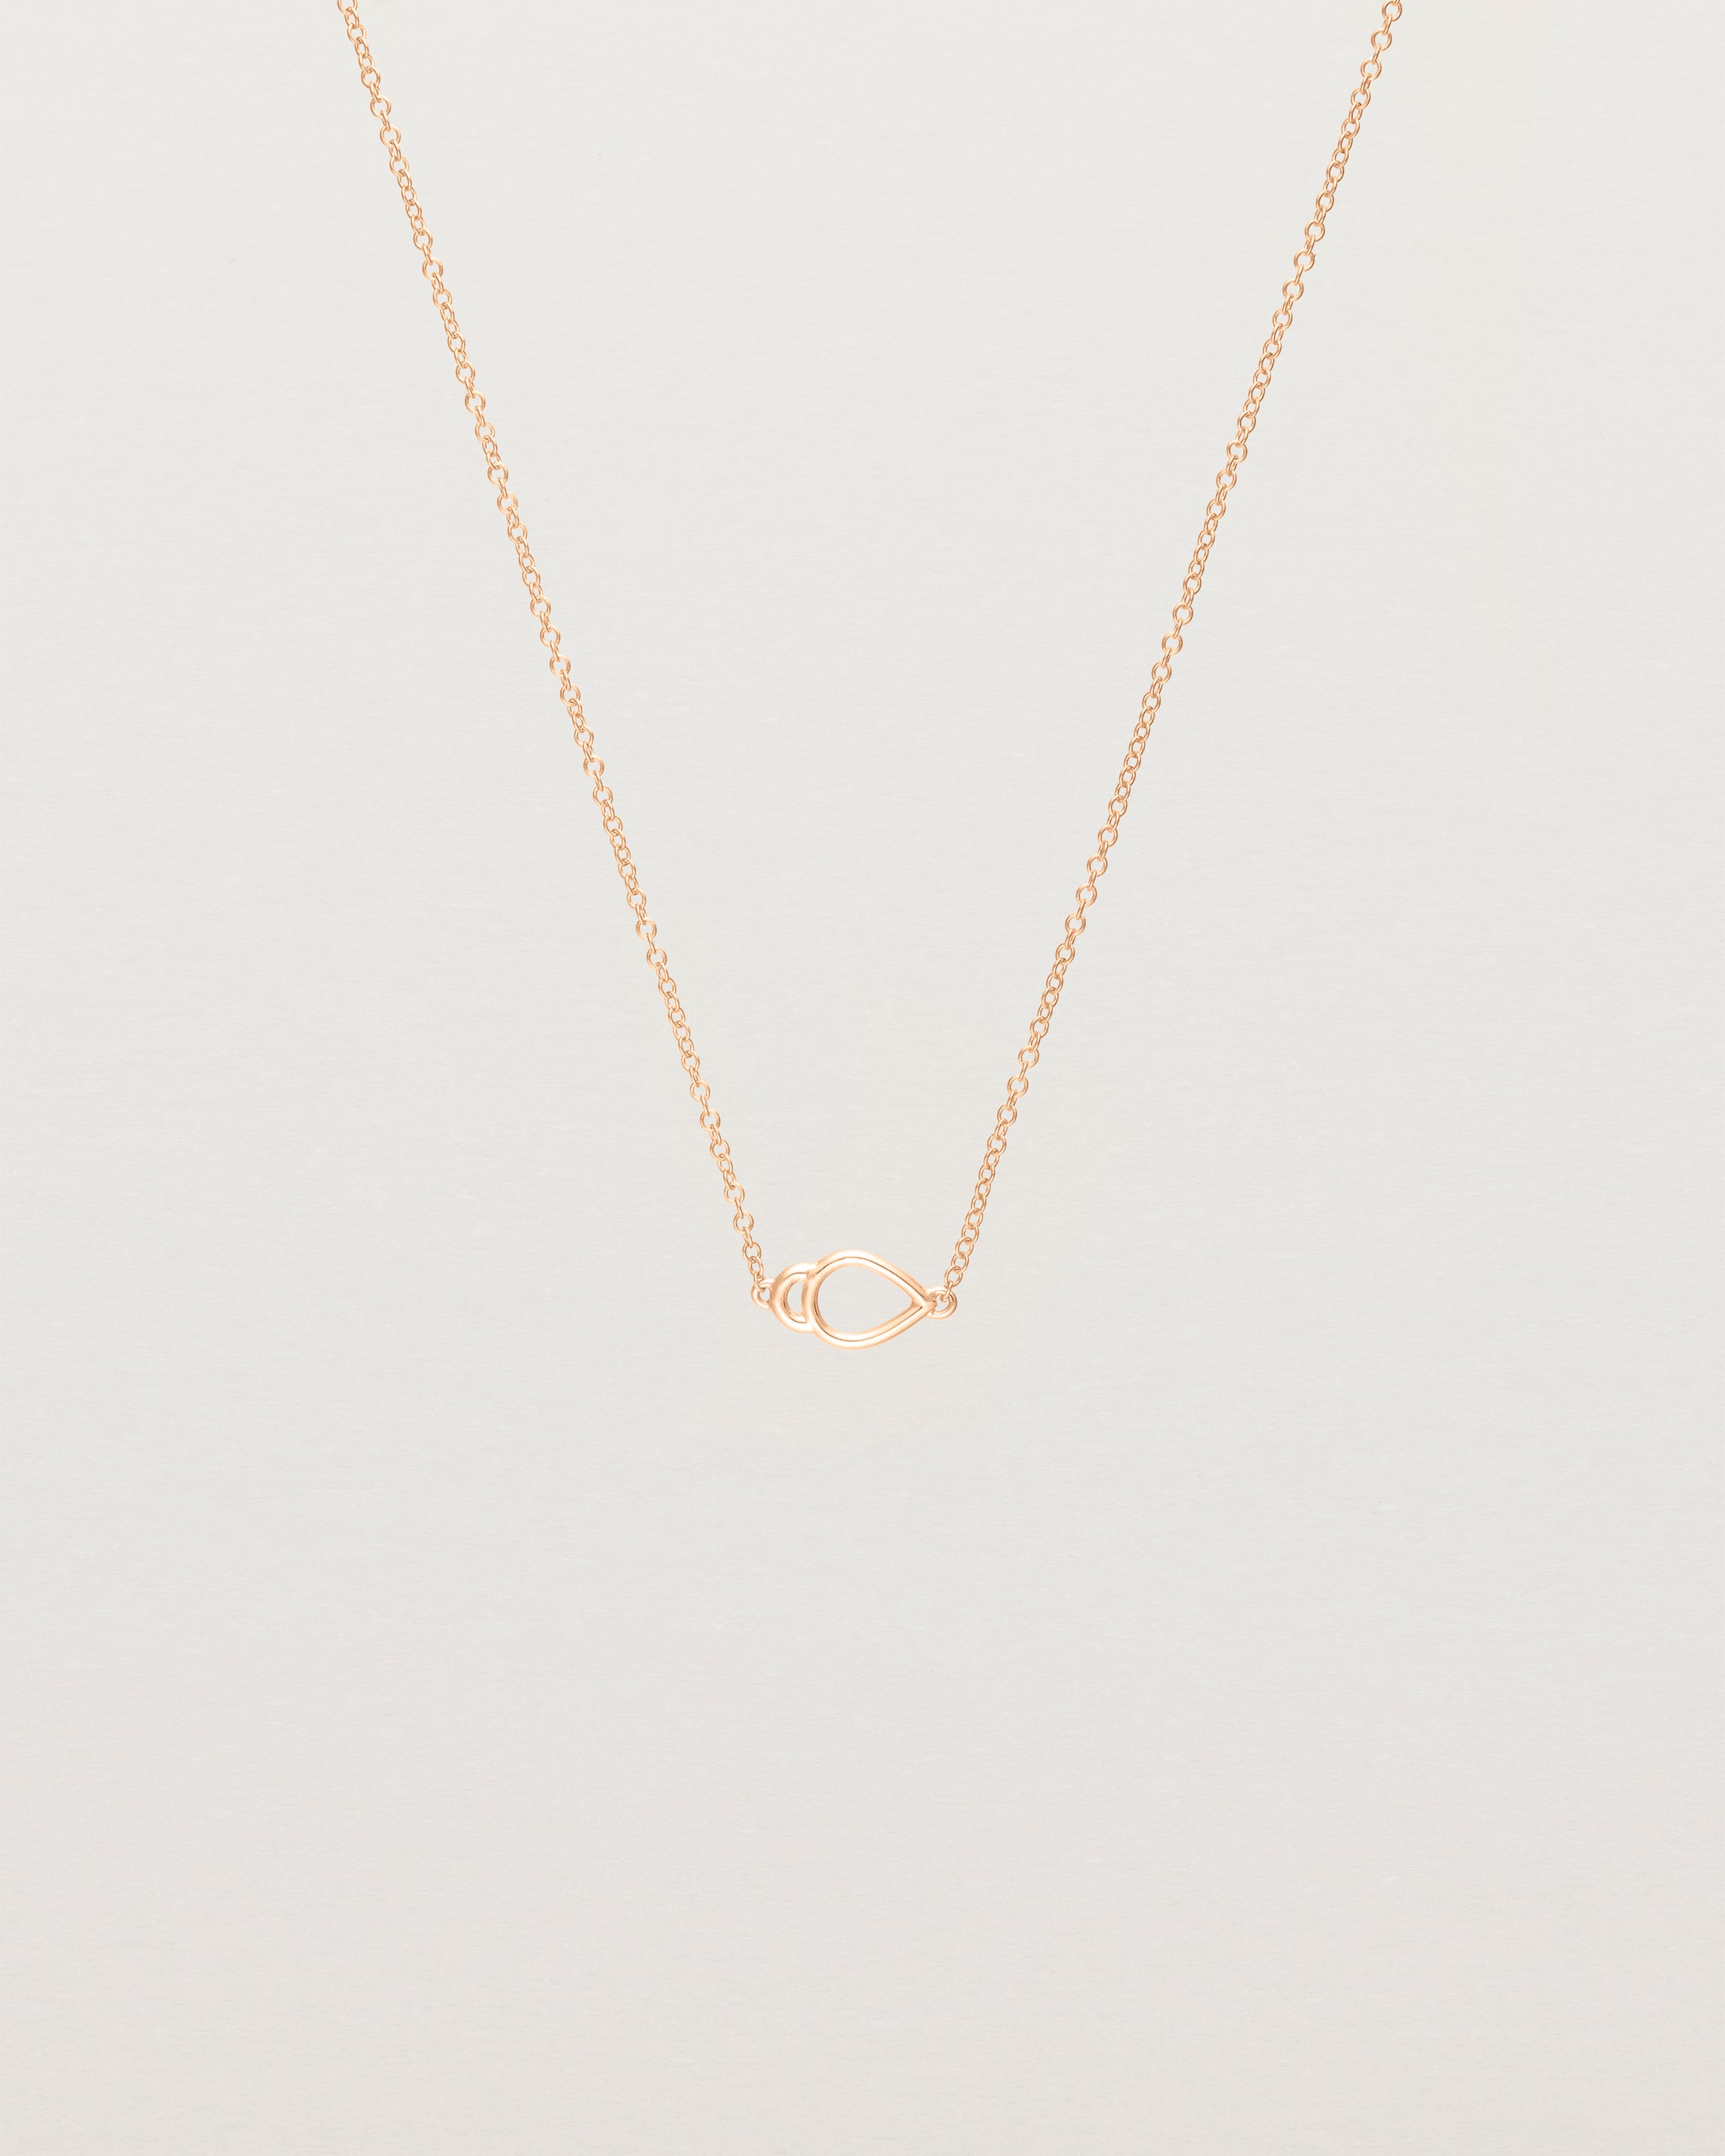 The Oana Necklace in Rose Gold.